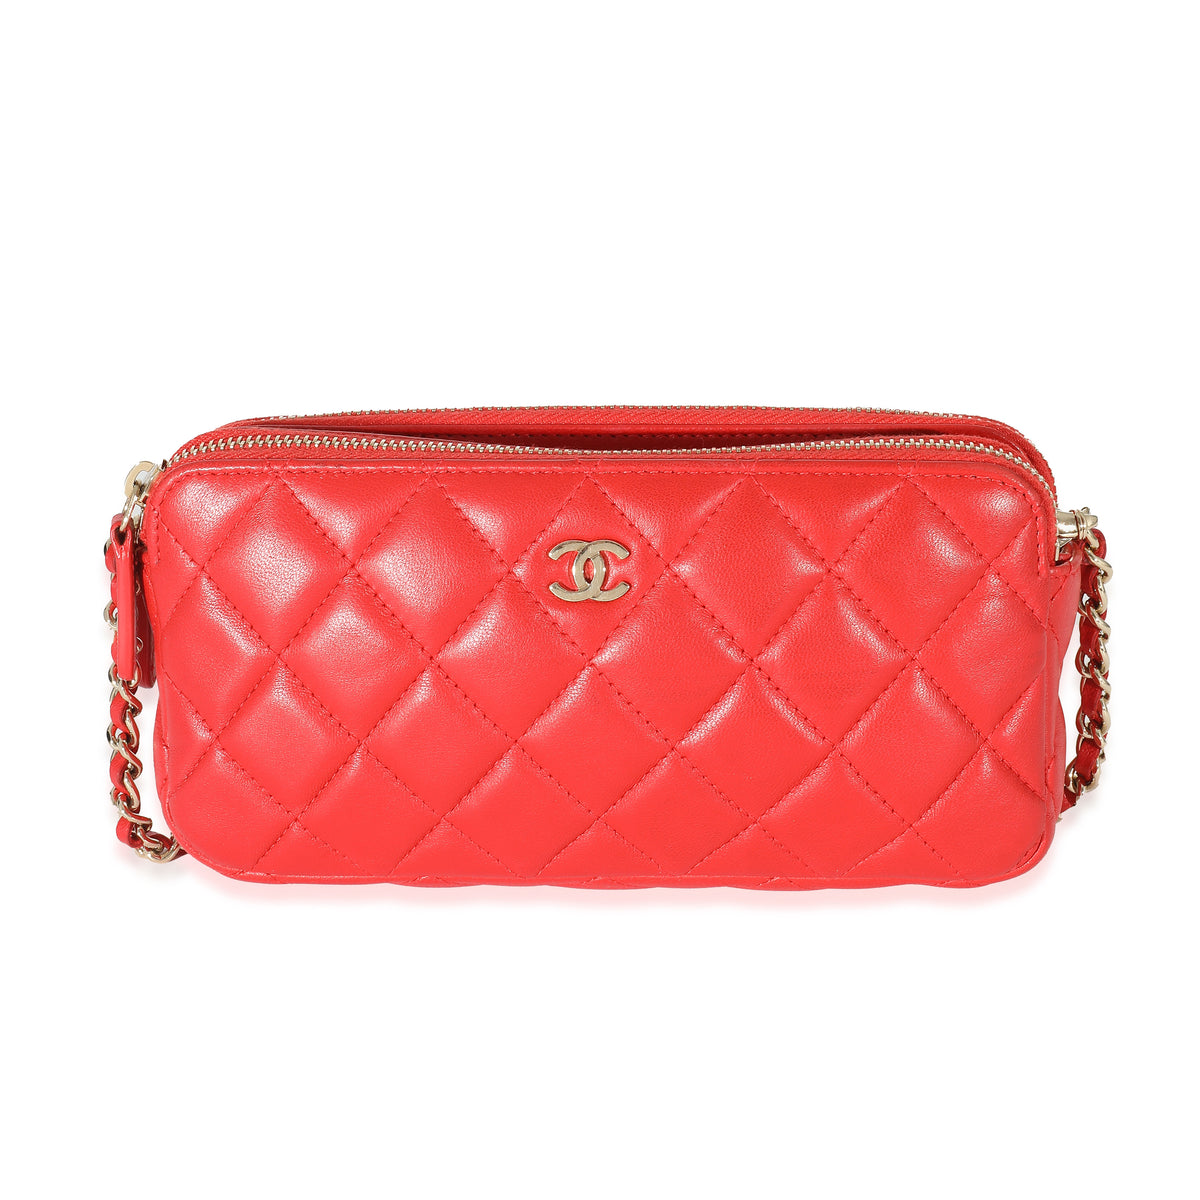 Chanel Red Lambskin Double Zip Clutch With Chain